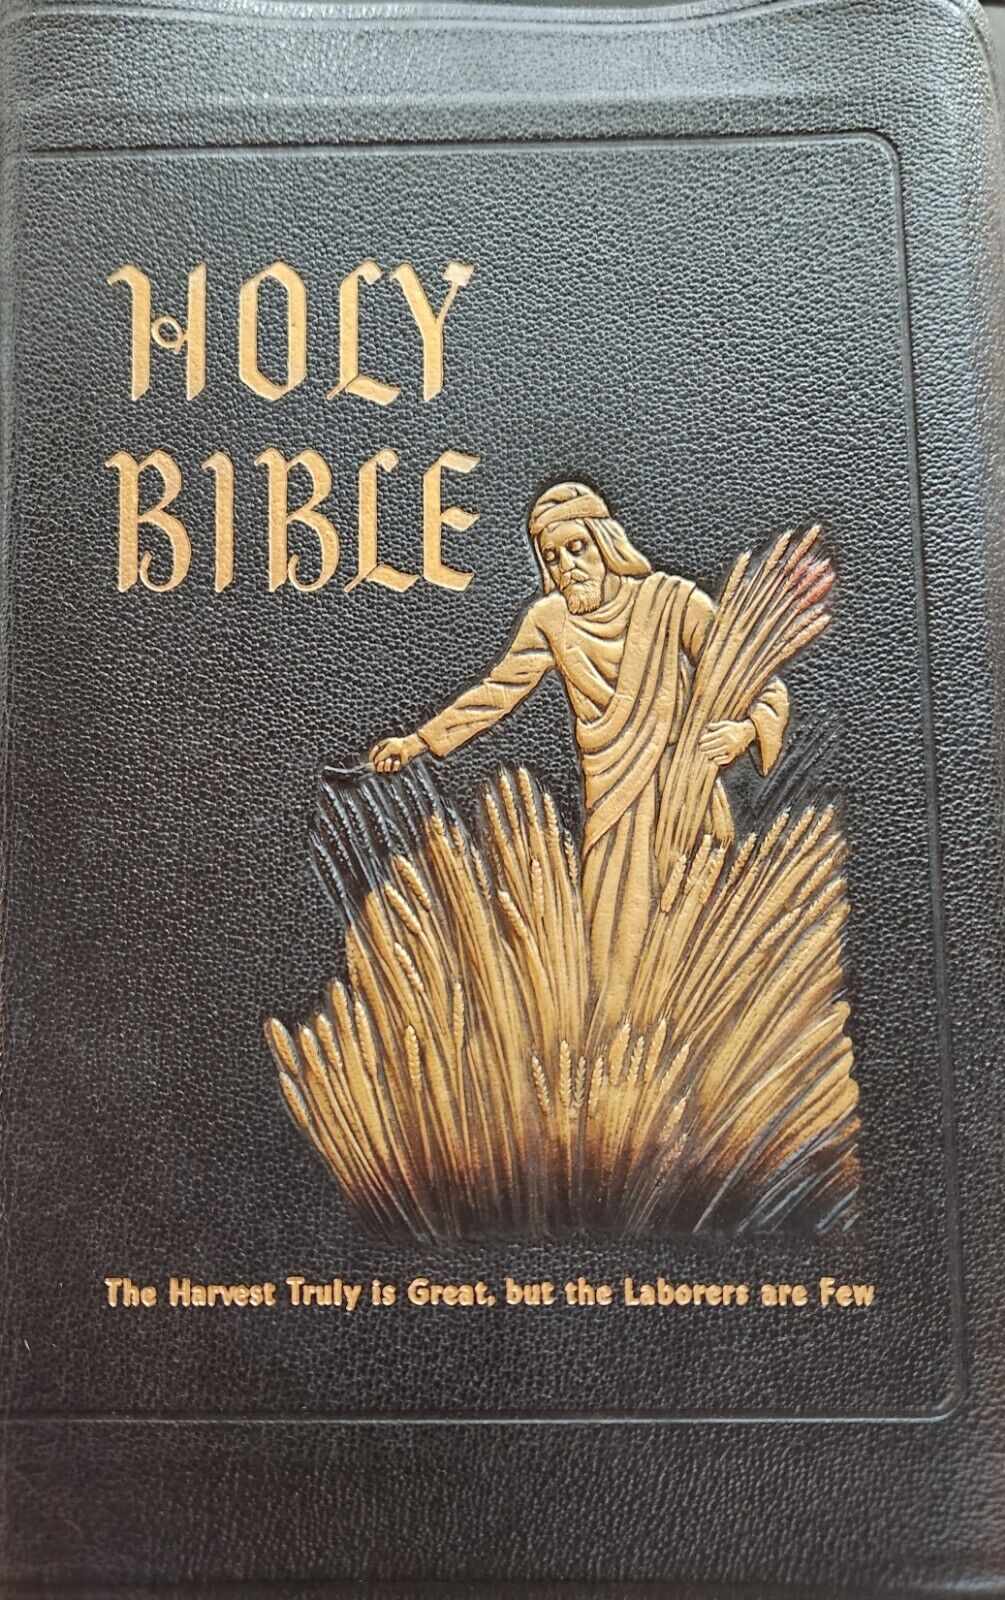 The Holy Bible Spiritual Harvest Edition Authorized King James Version Rare 1955